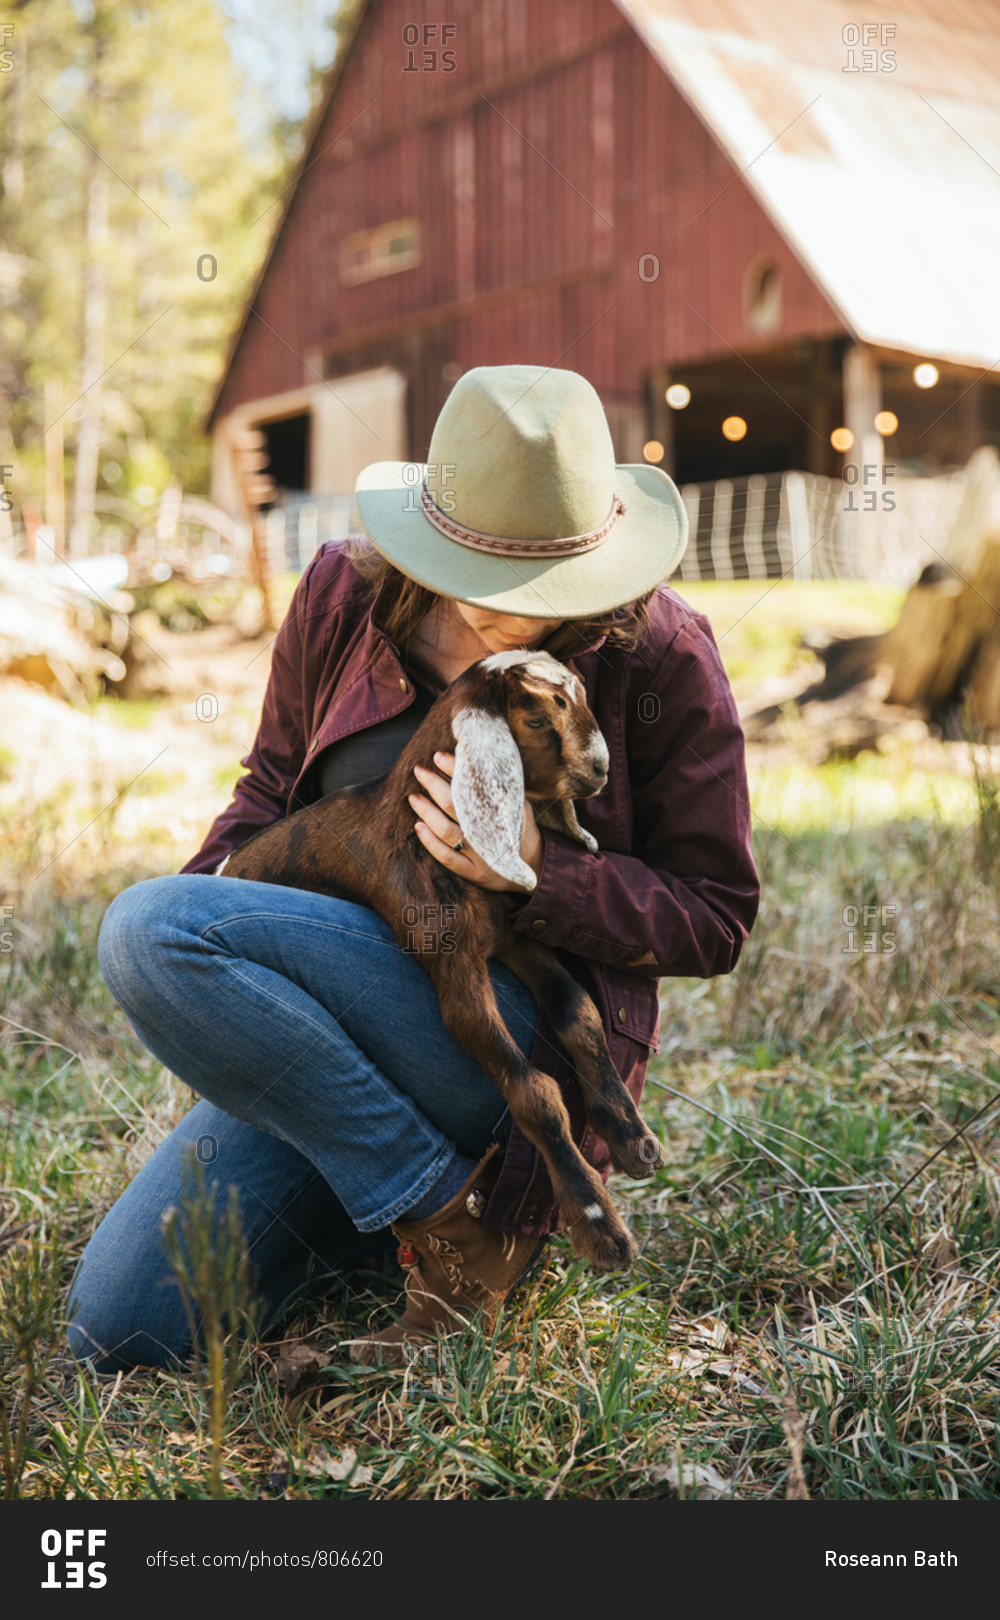 Woman cuddling a baby goat in front of a barn.